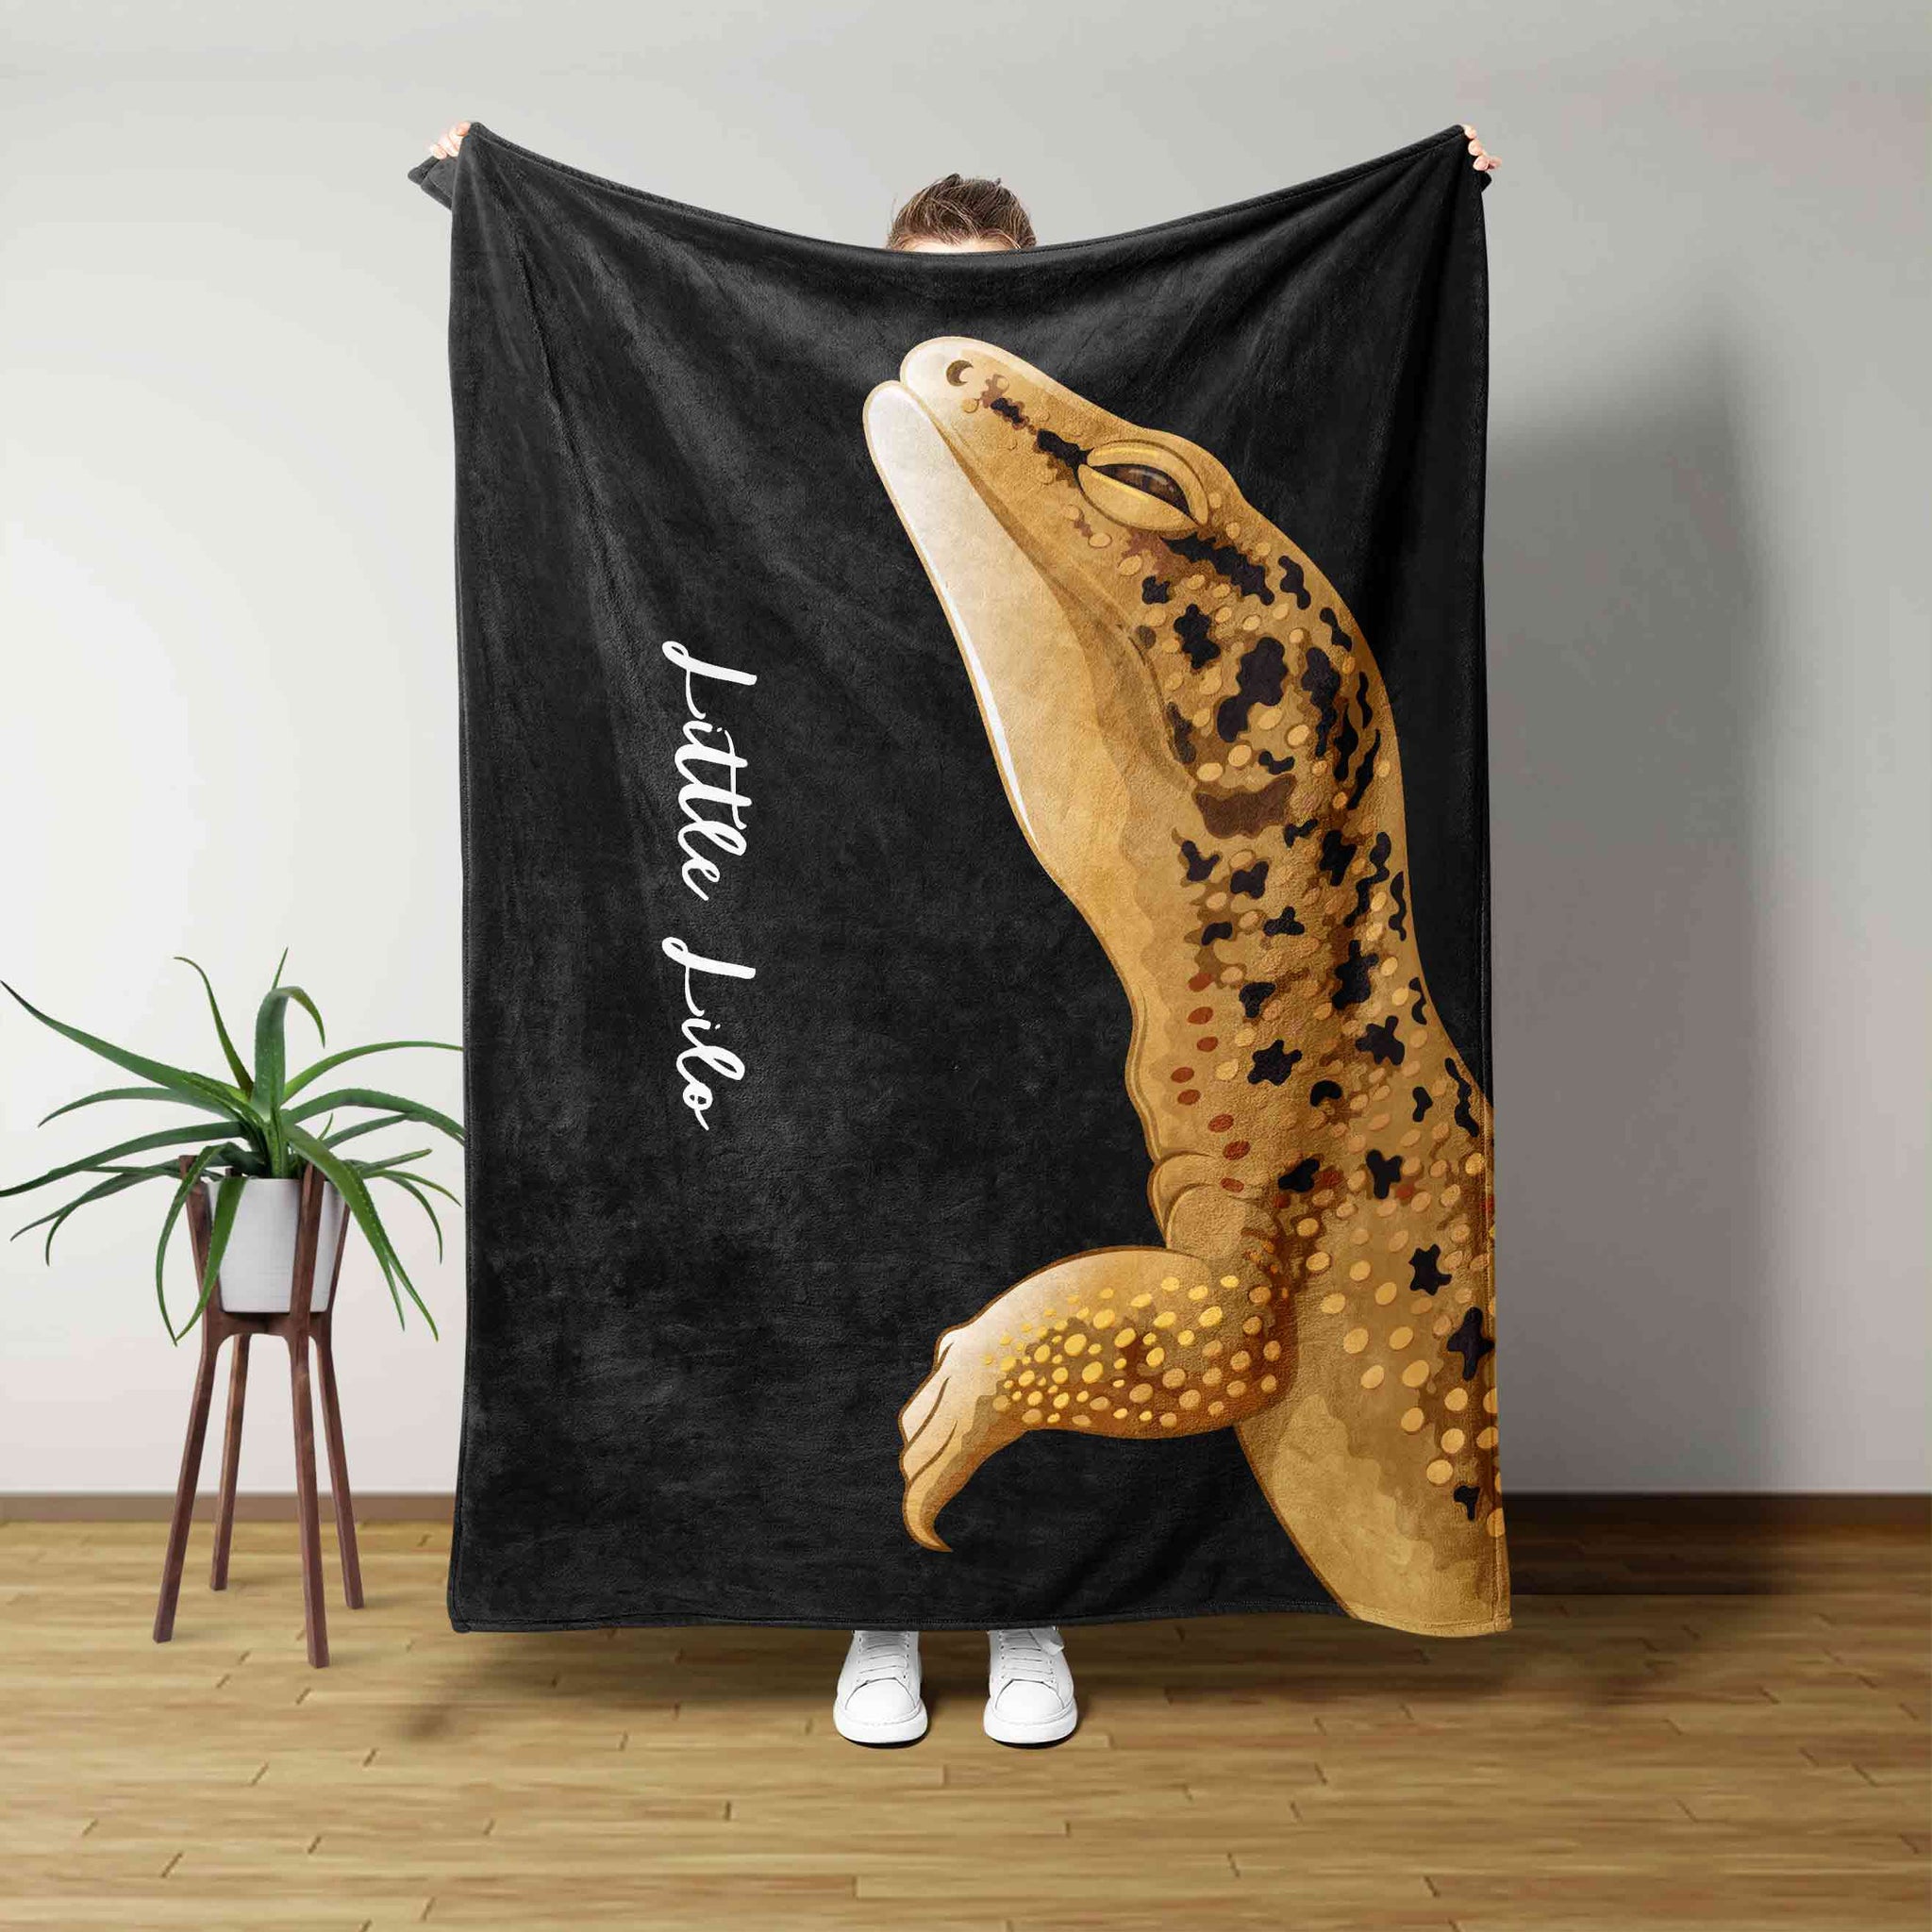 Personalized Name Blanket, Leopard Gecko Blanket, Pet Blanket, Custom Pet Blanket, Gift Blanket